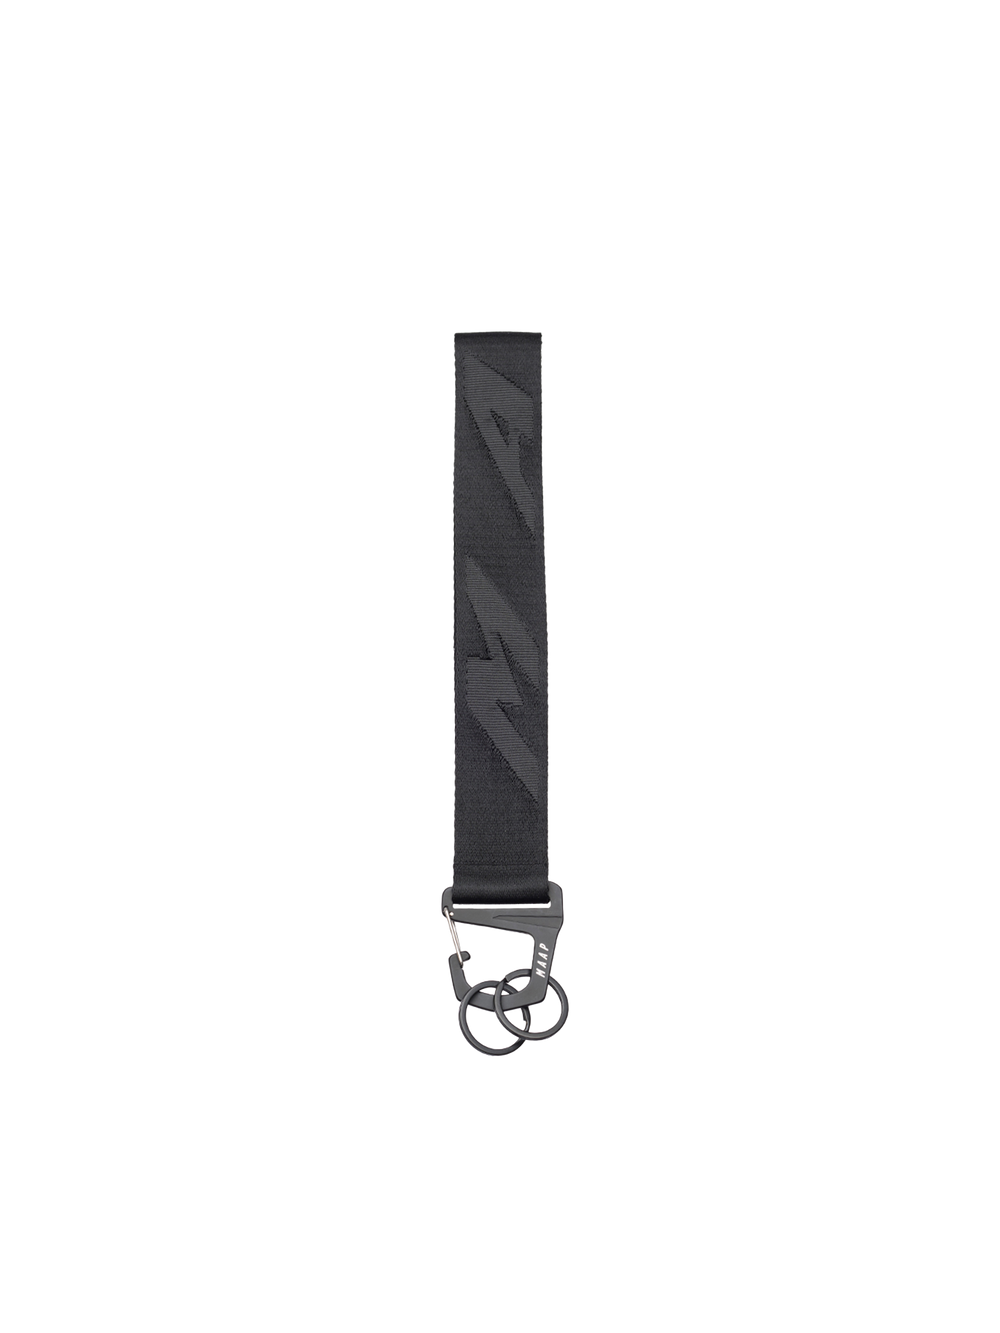 Product Image for Evade Keychain